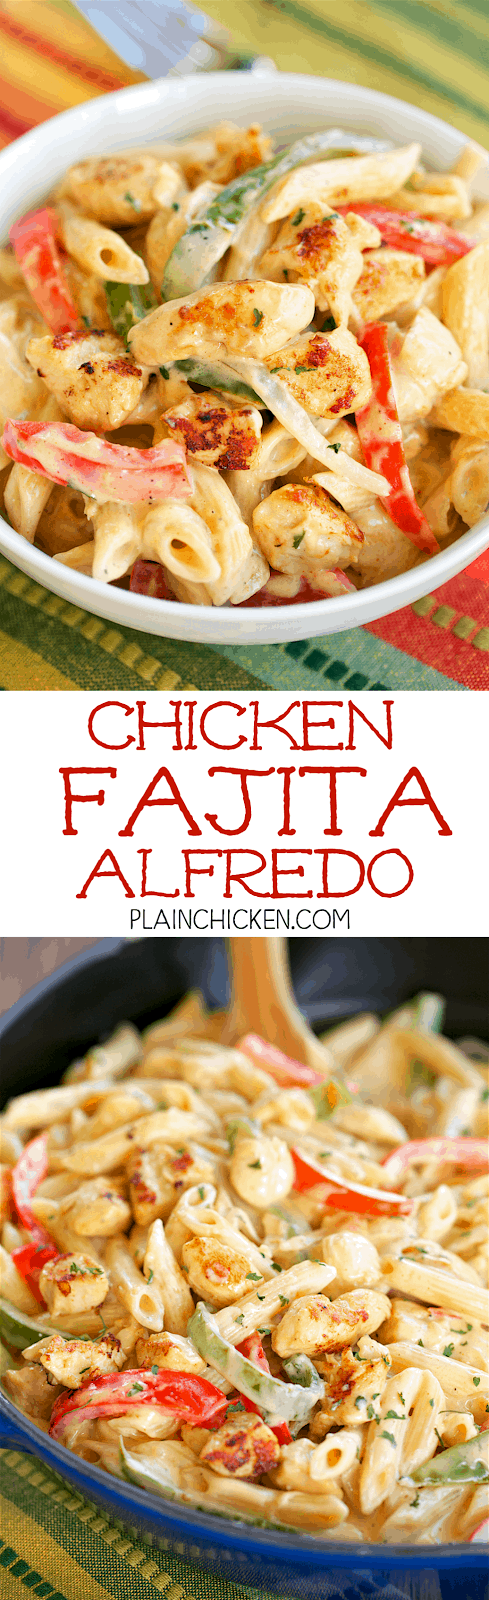 Chicken Fajita Alfredo - ready in 15 minutes! All the flavors of fajitas tossed with pasta and an easy homemade Alfredo sauce. Chicken onion, bell pepper, fajita seasoning, heavy cream, pasta and parmesan cheese. Everyone loved this! It has already been requested for dinner again! No prep and ready in 15 minutes. GREAT weeknight meal!